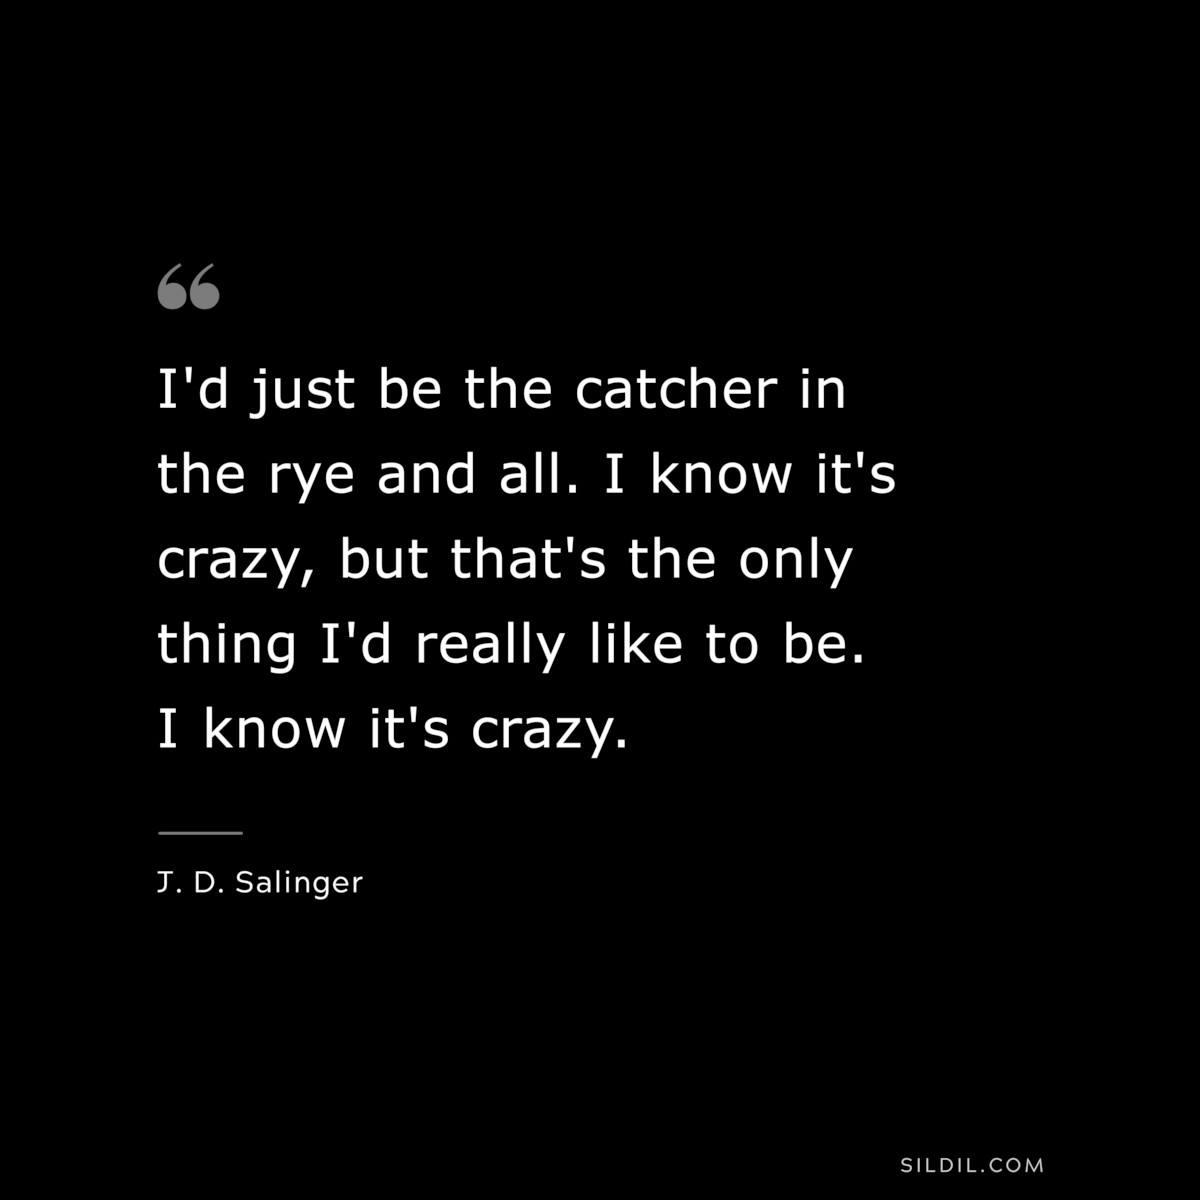 I'd just be the catcher in the rye and all. I know it's crazy, but that's the only thing I'd really like to be. I know it's crazy. — J. D. Salinger